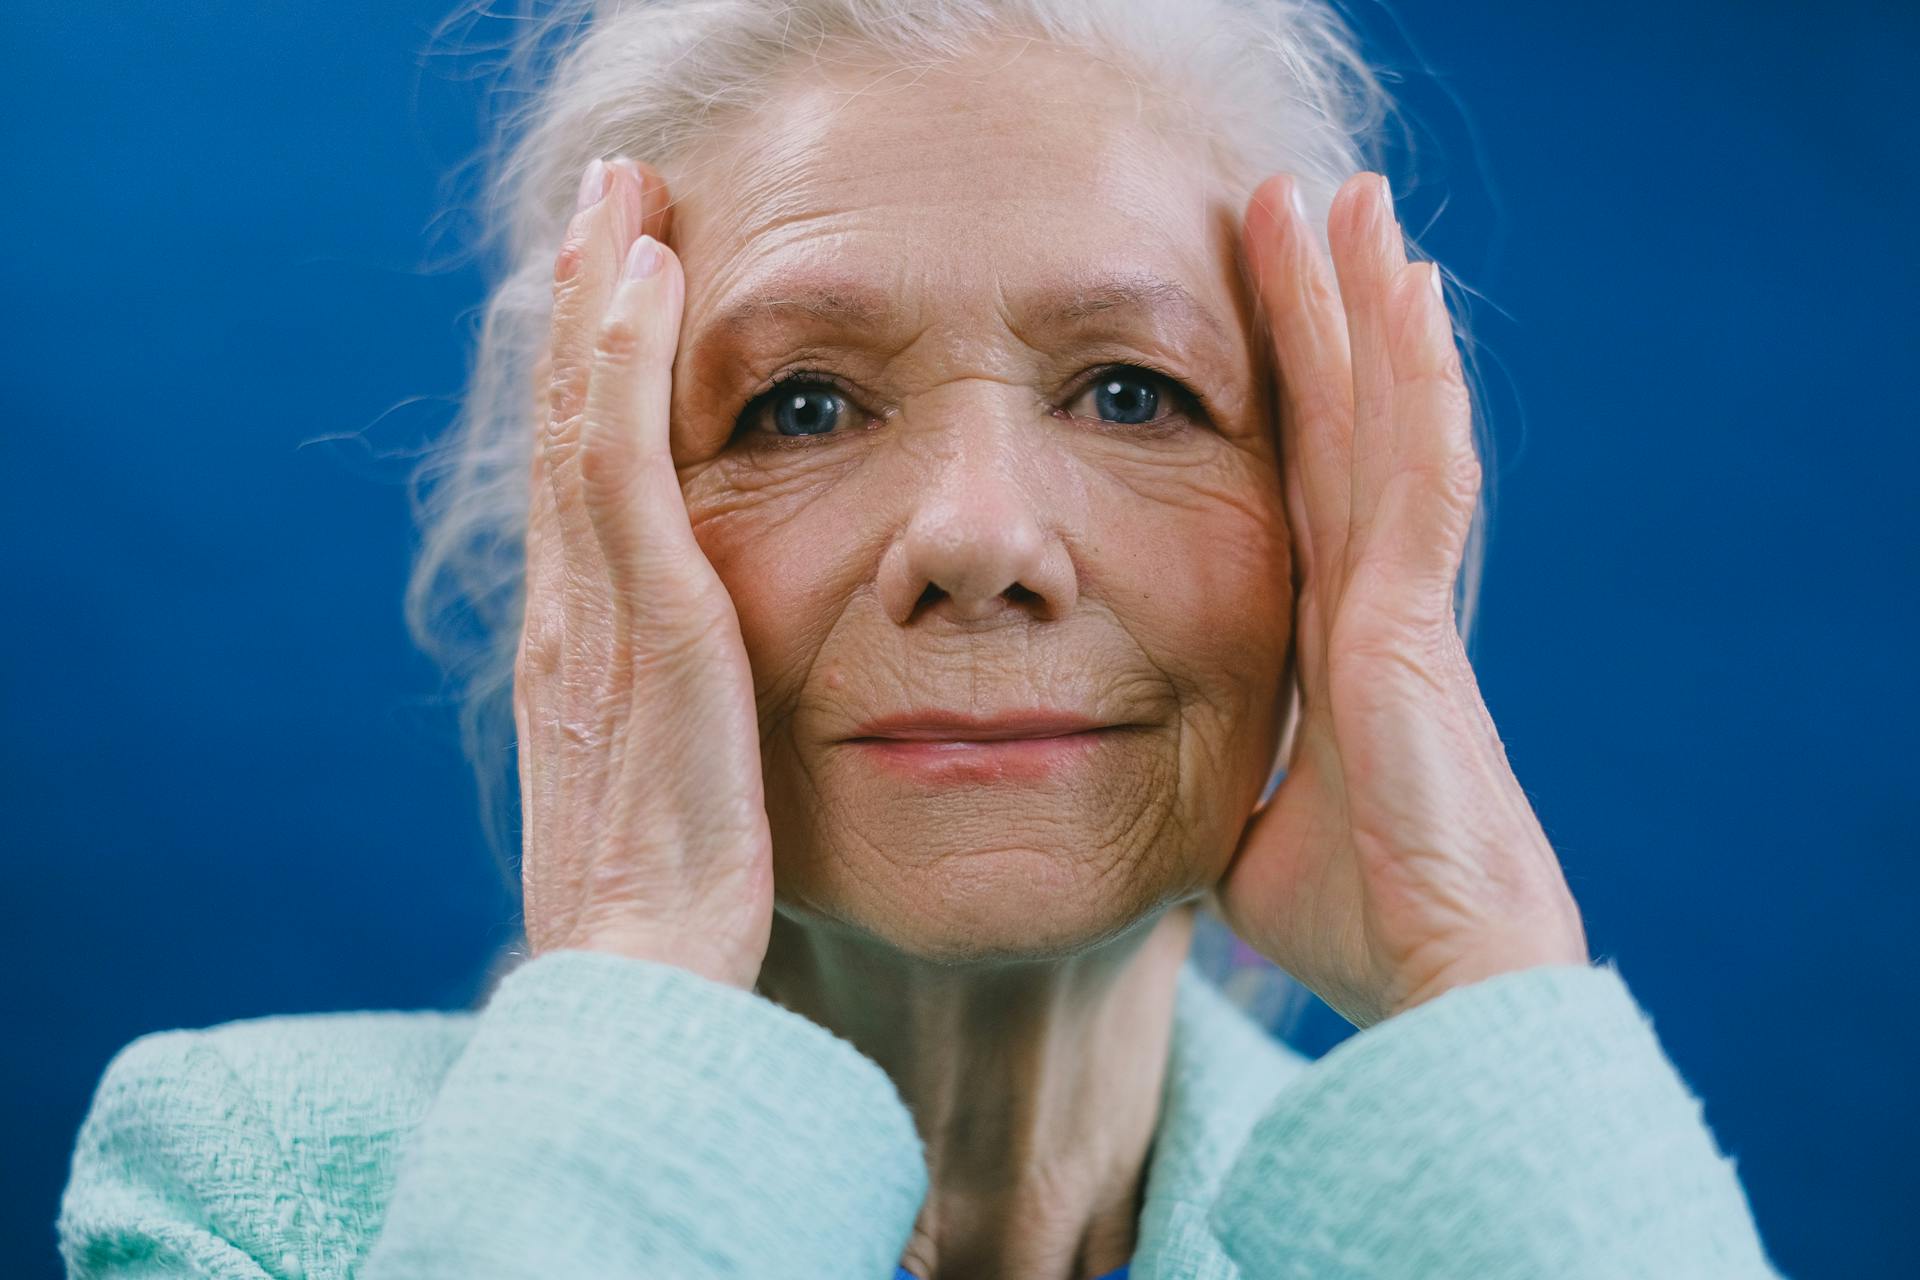 A frustrated older woman smiling | Source: Pexels